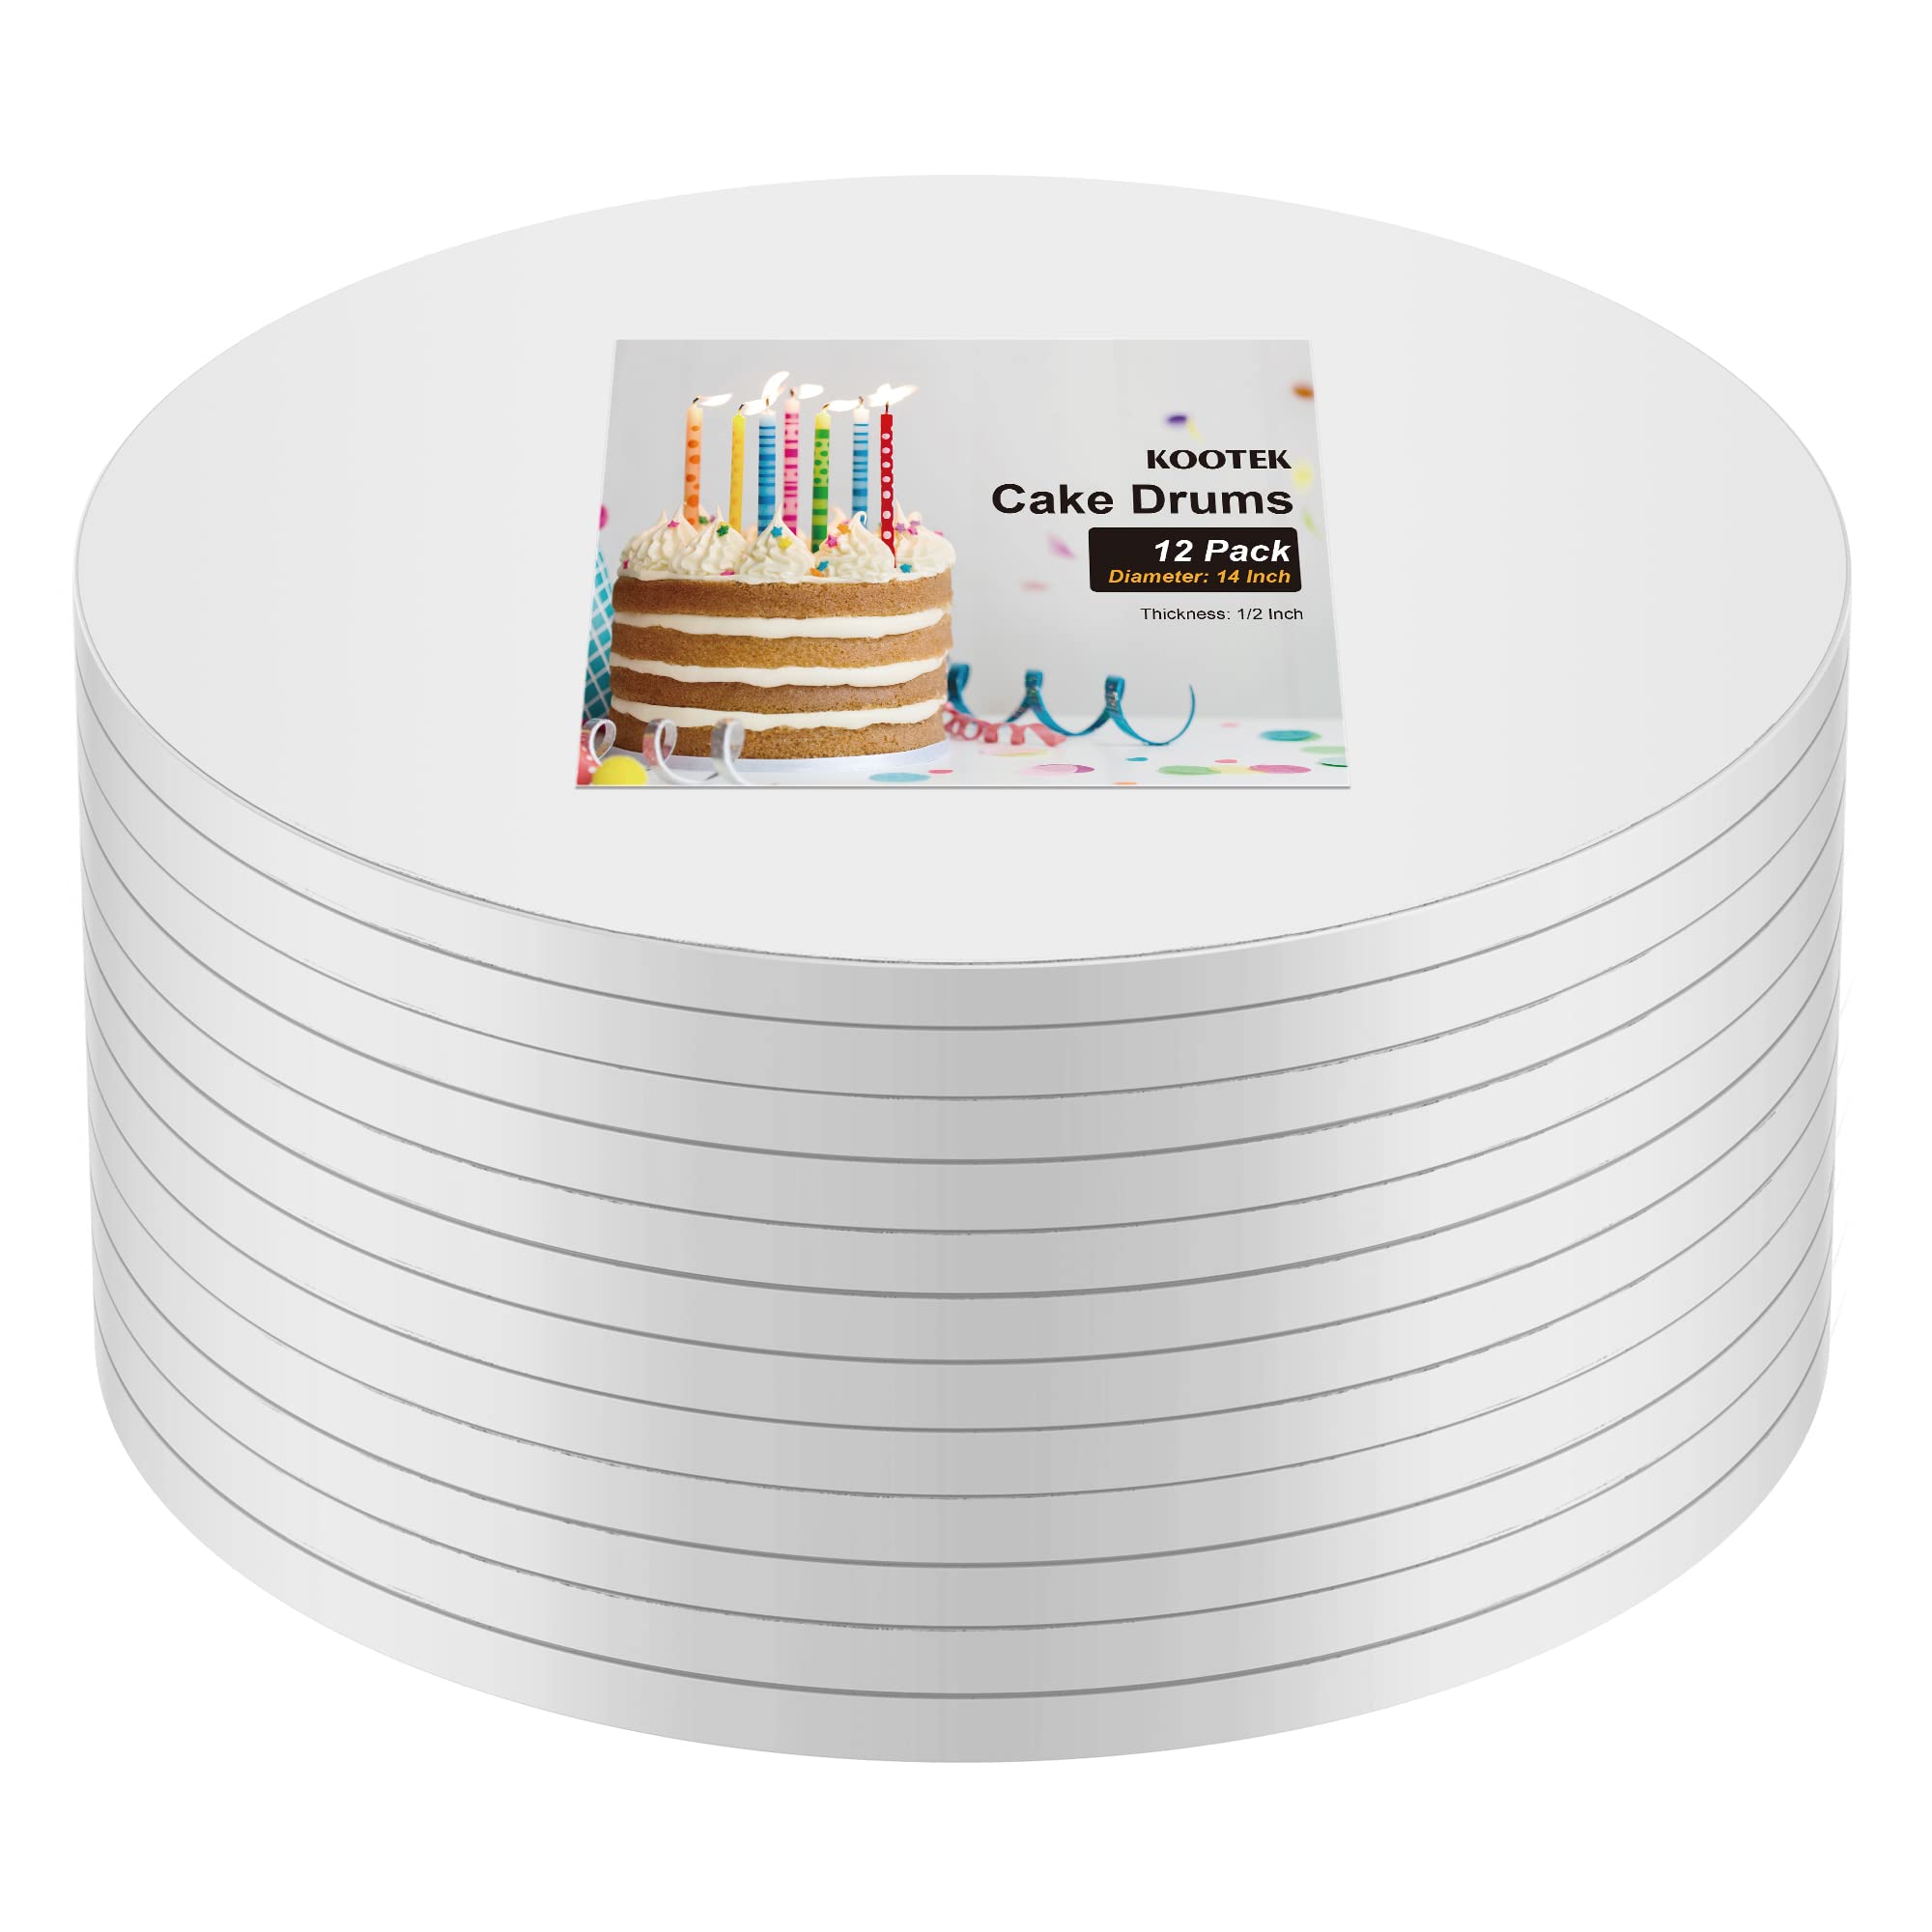 Kootek Cake Boards Drum 14 Inch Round, 1/2" Thick Cake Drums, Cake Decorating Supplies White 12 Pack Sturdy Cake Corrugated Cardboard for Multi-Layer Cakes